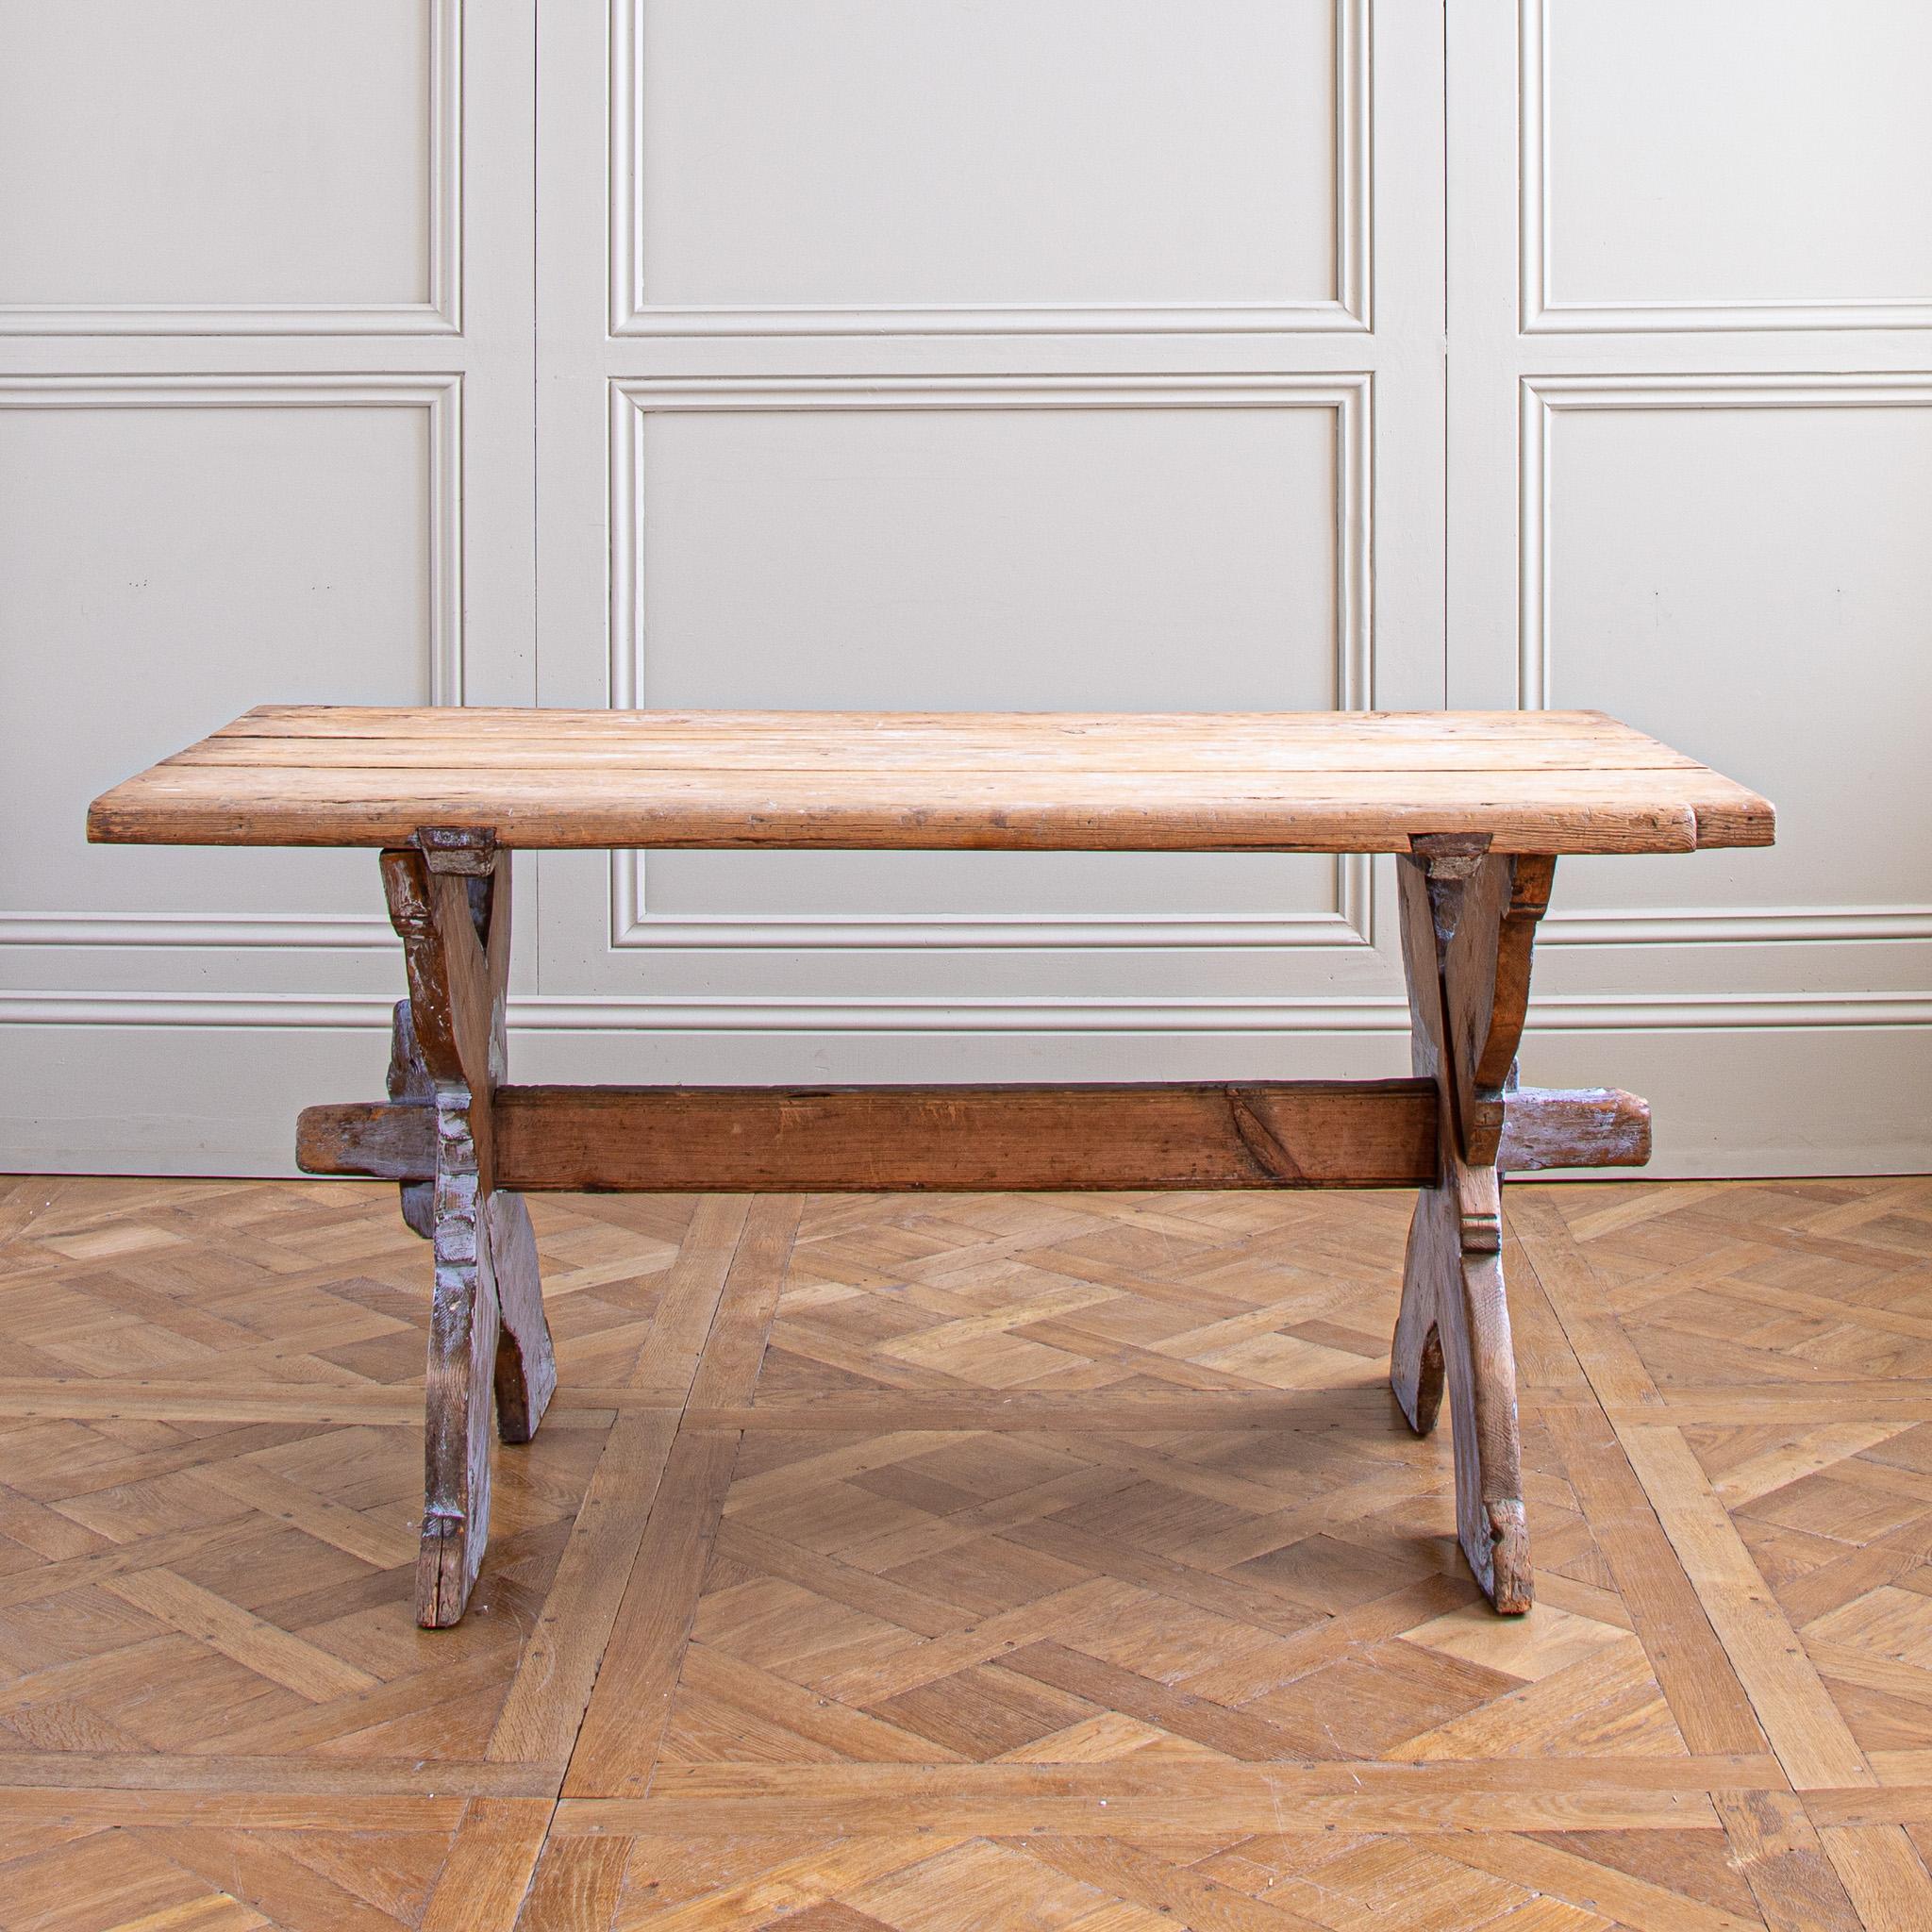 Pine Antique Rustic Swedish Farm House Table With Chalk Blue Patina Circa 1860 For Sale